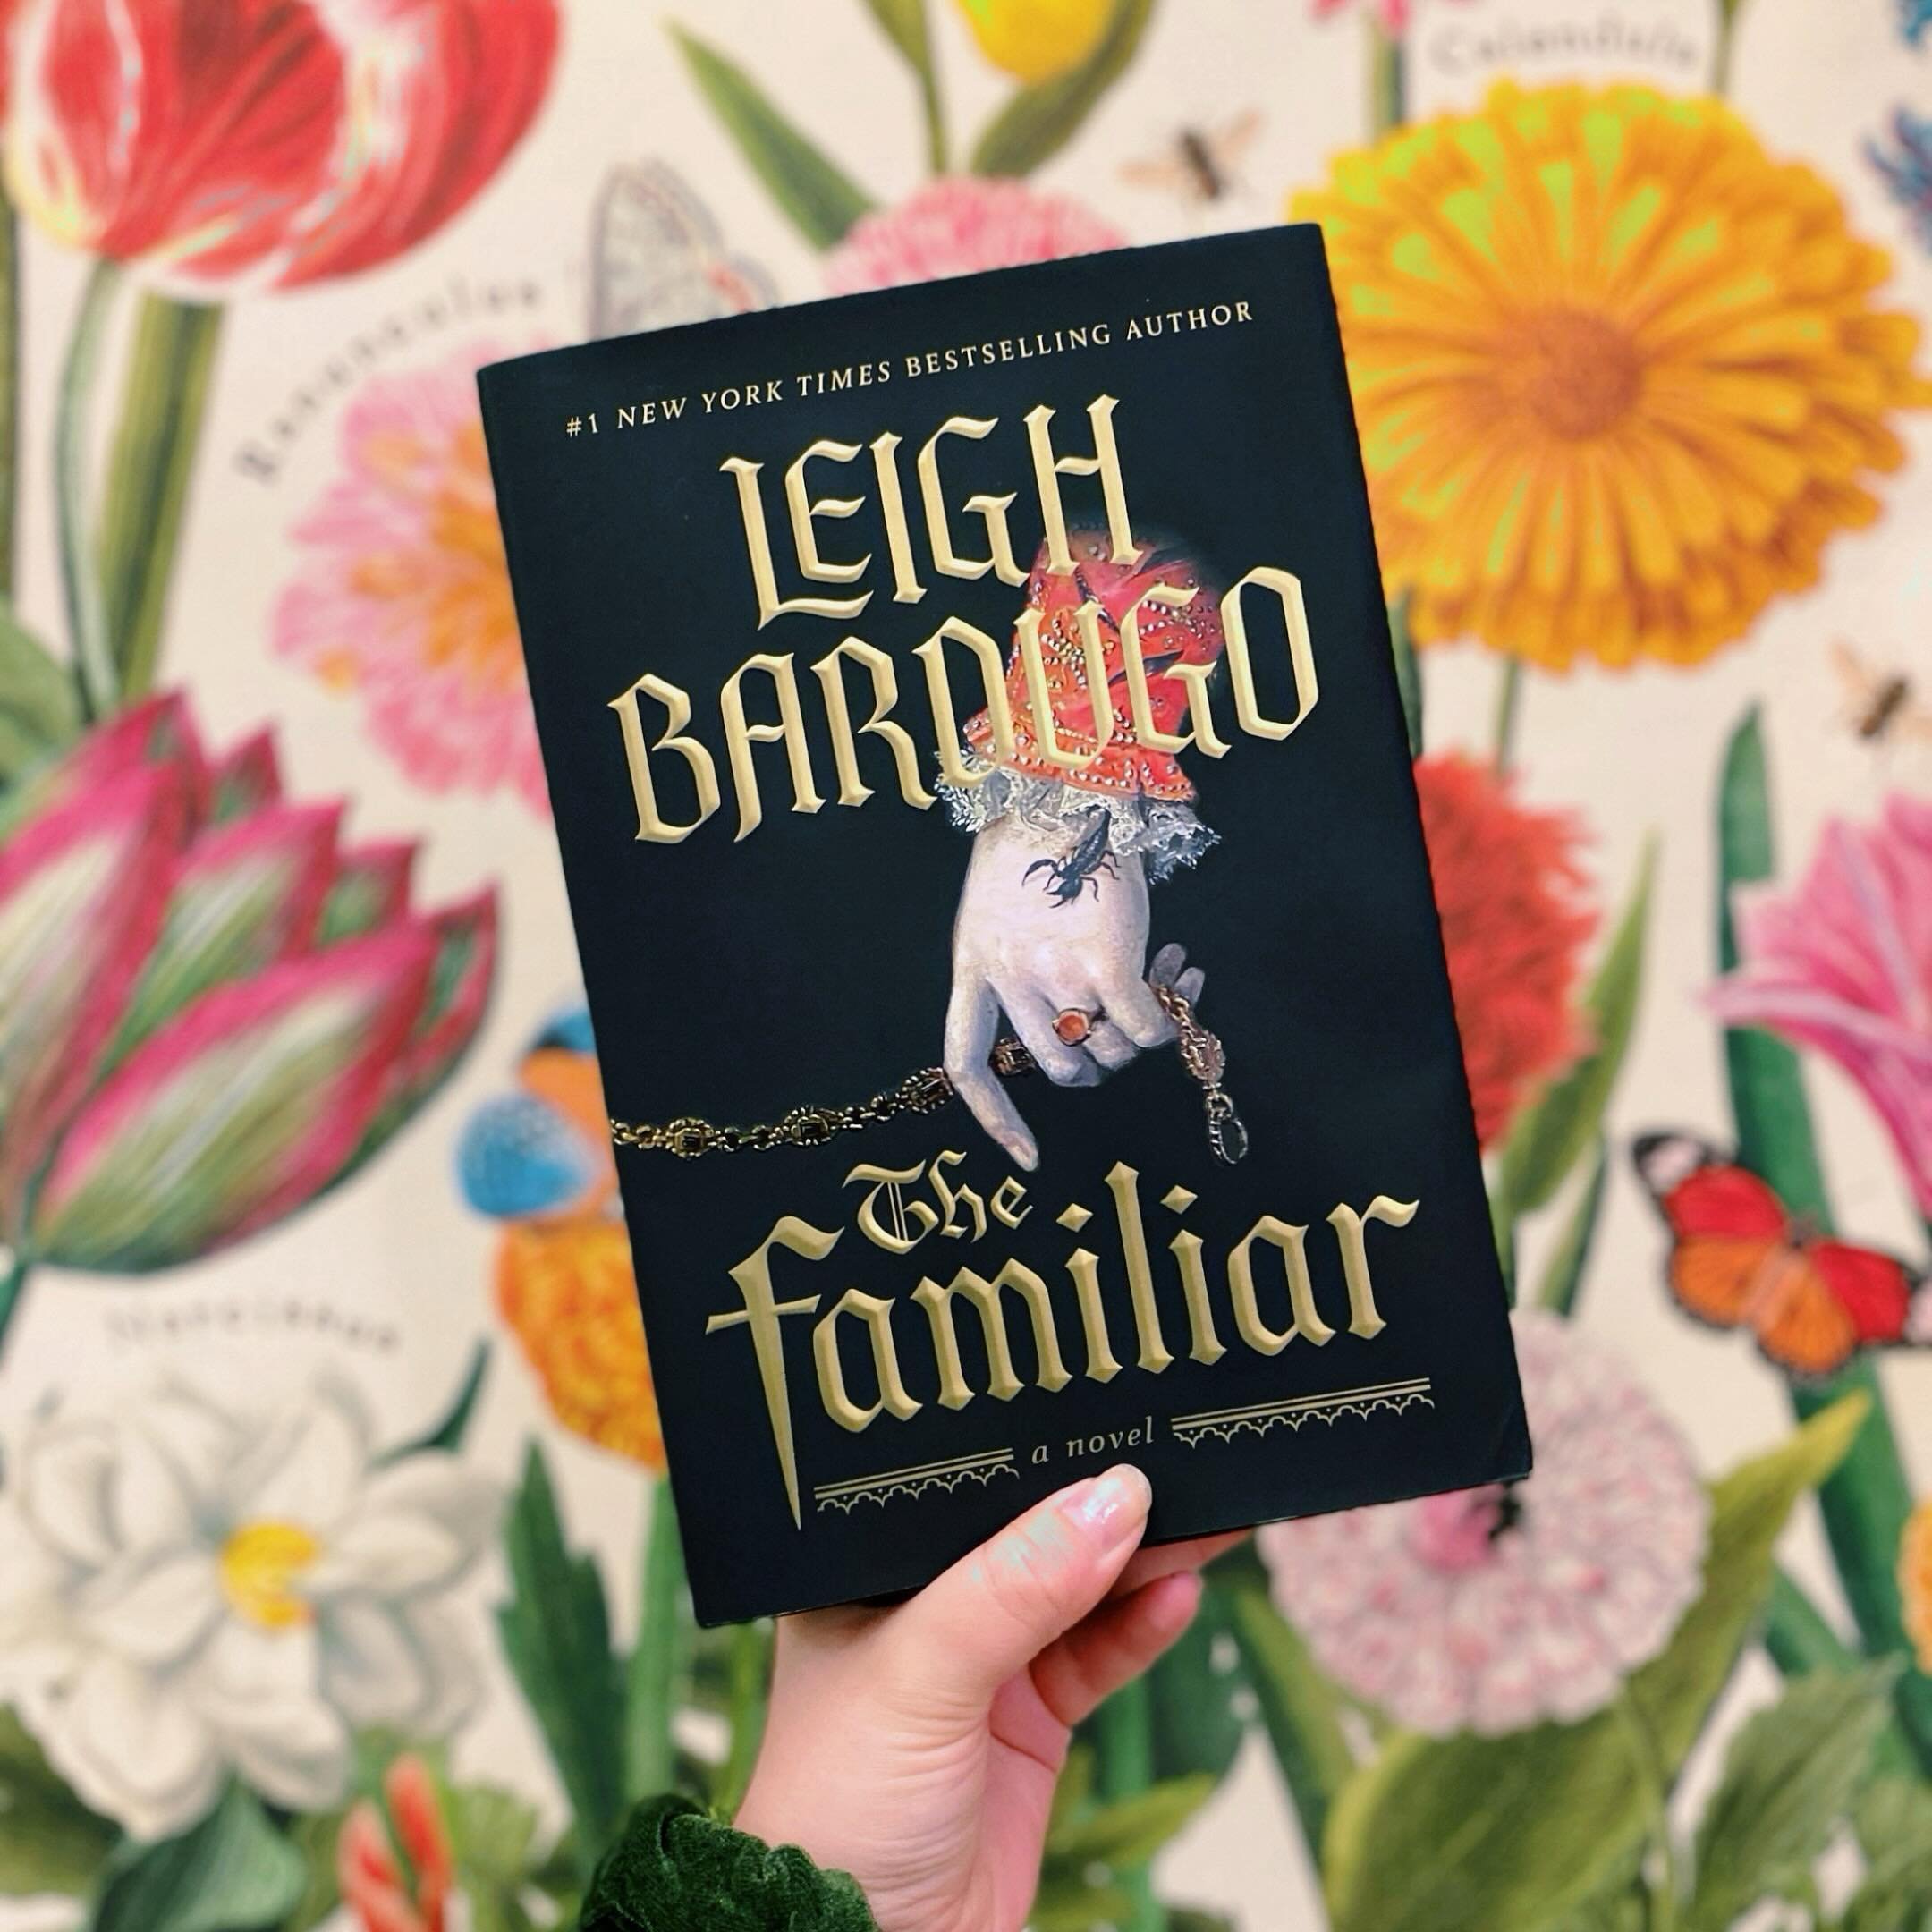 ICYMI the new @lbardugo is out and the cover is almost UNREASONABLY HOT 😍